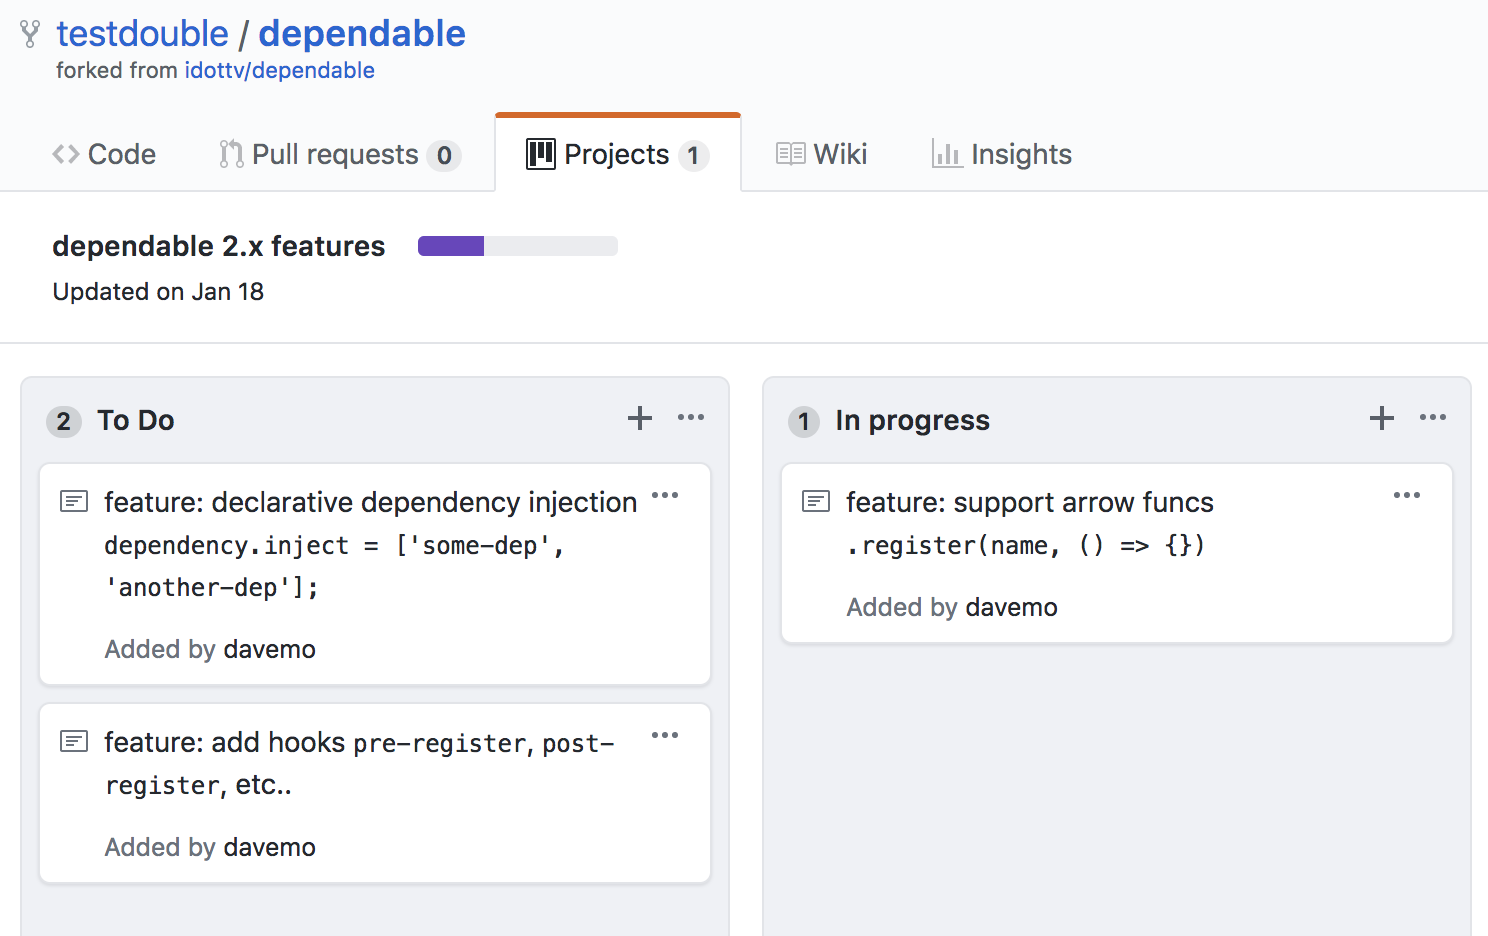 Github Projects